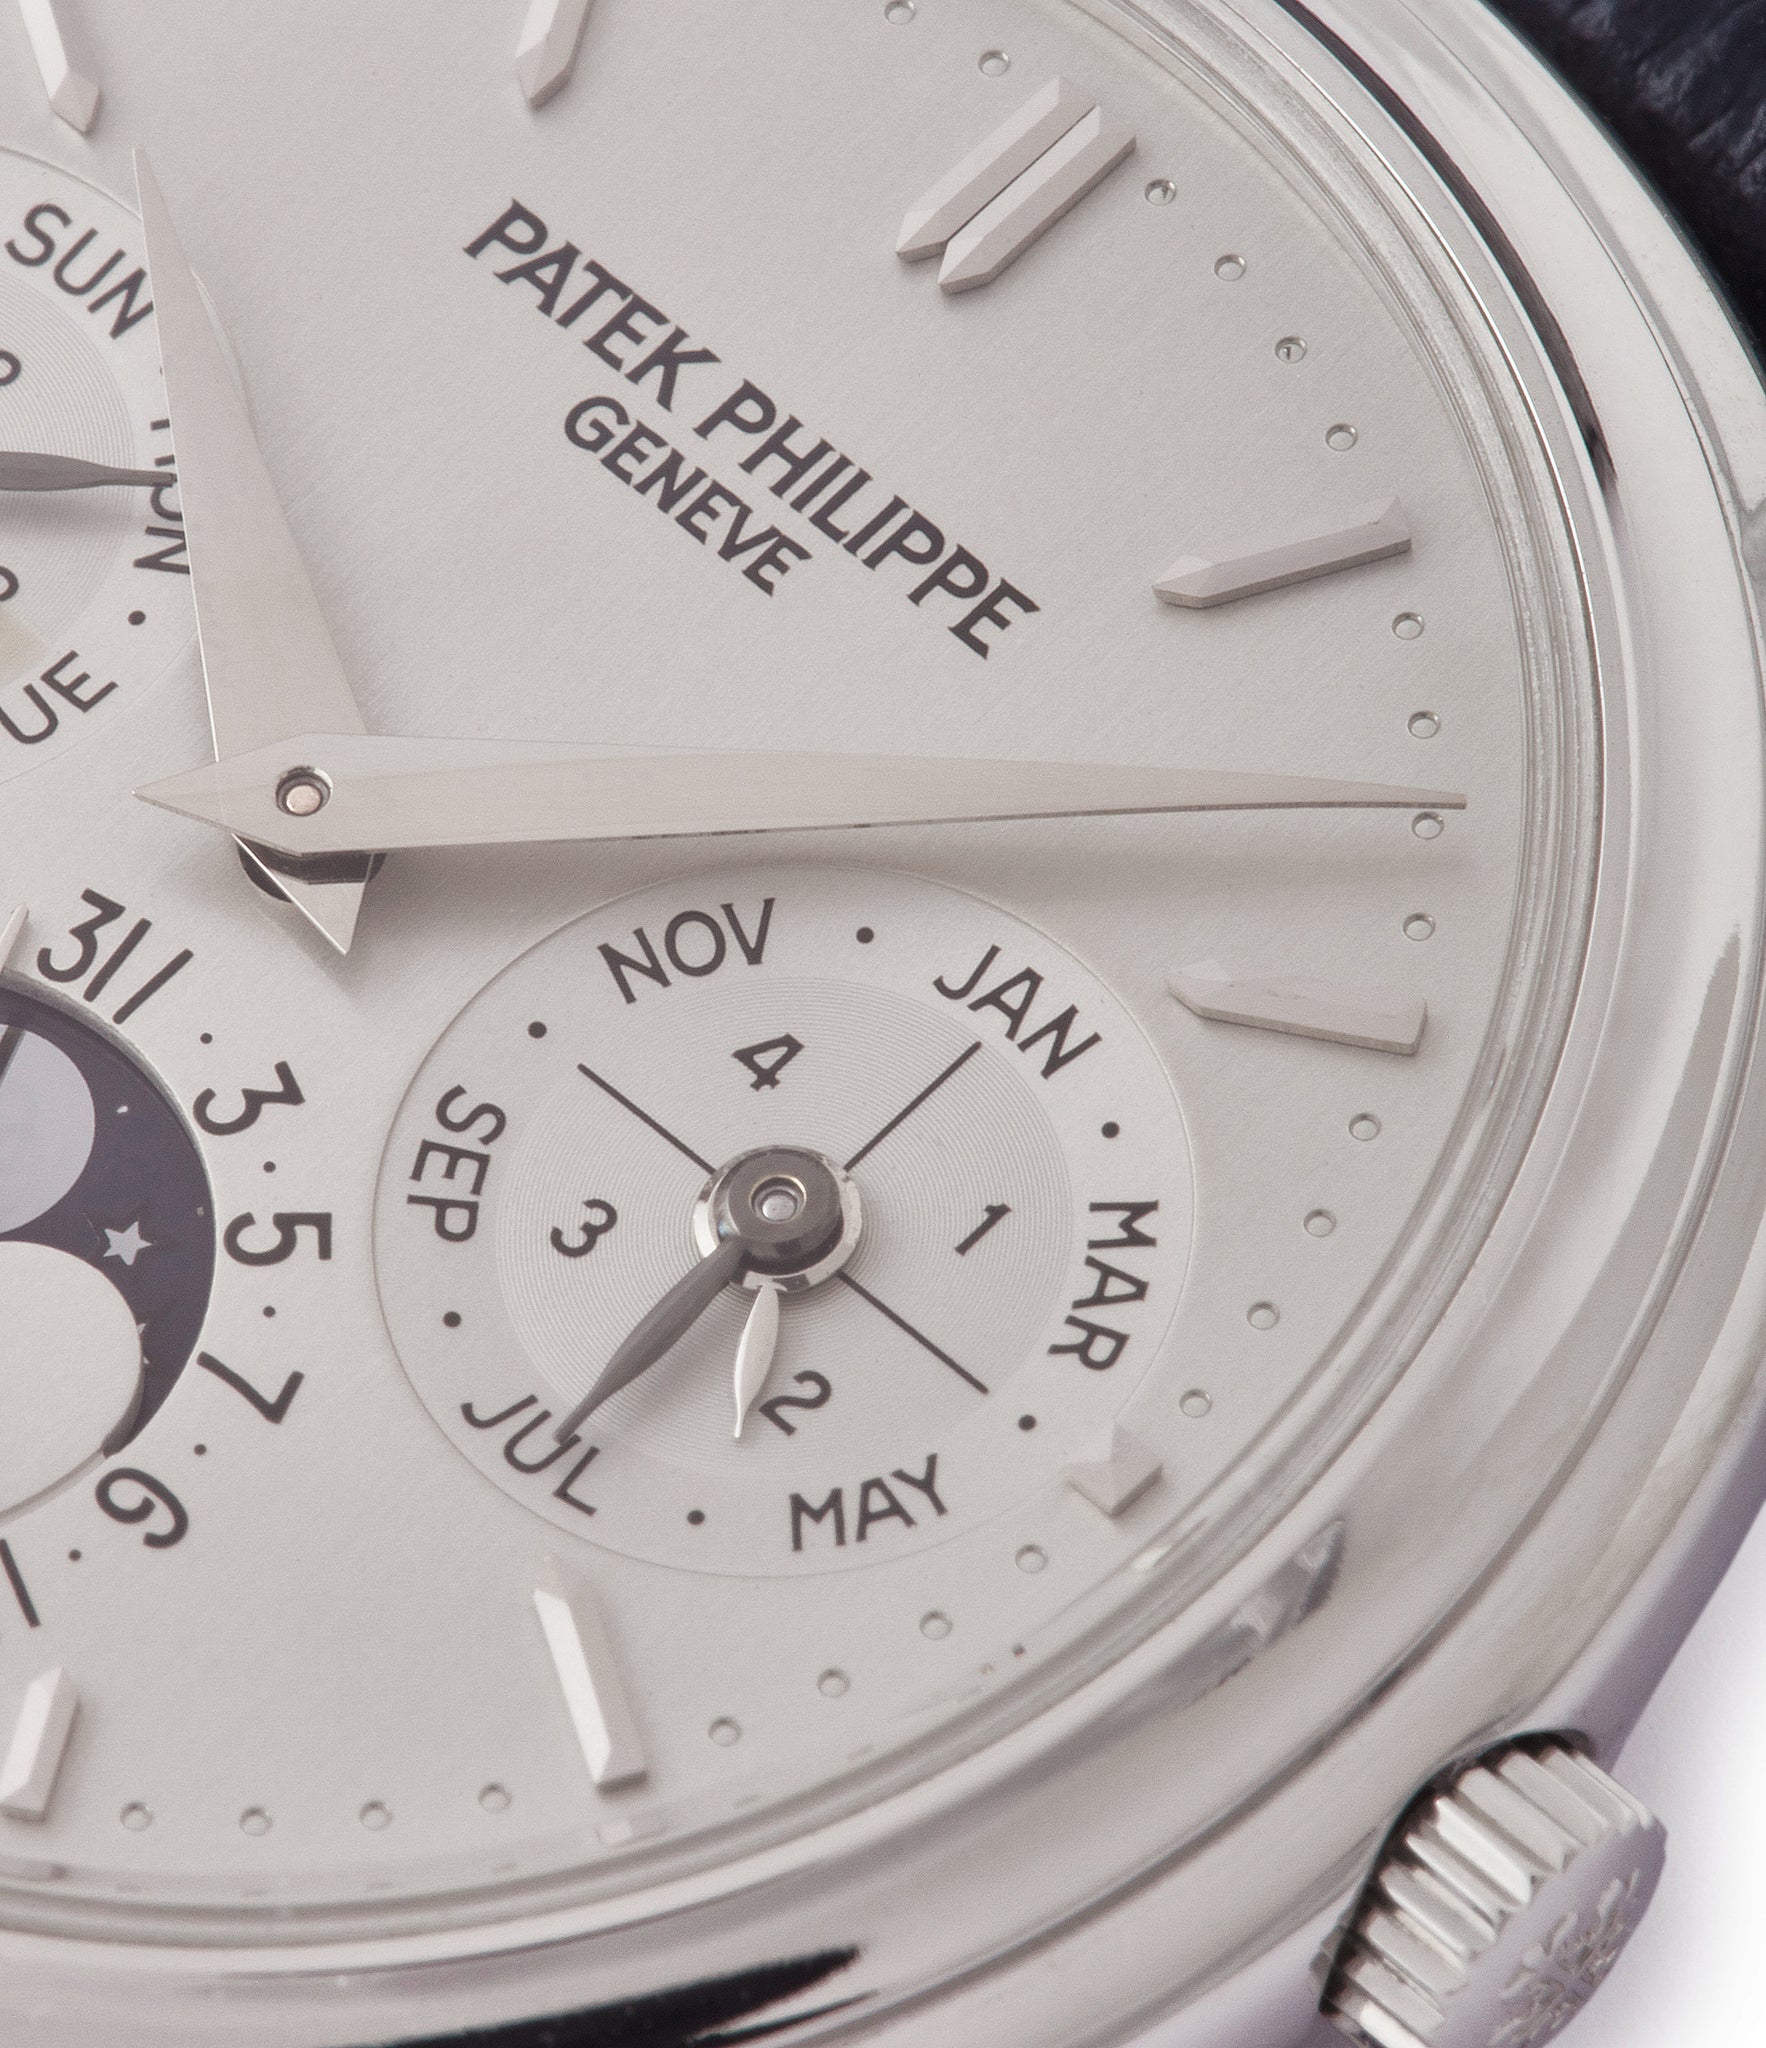 perpetual calendar Patek Philippe 3940P platinum rare dress watch full set for sale online at A Collected Man London UK specialist of rare watches